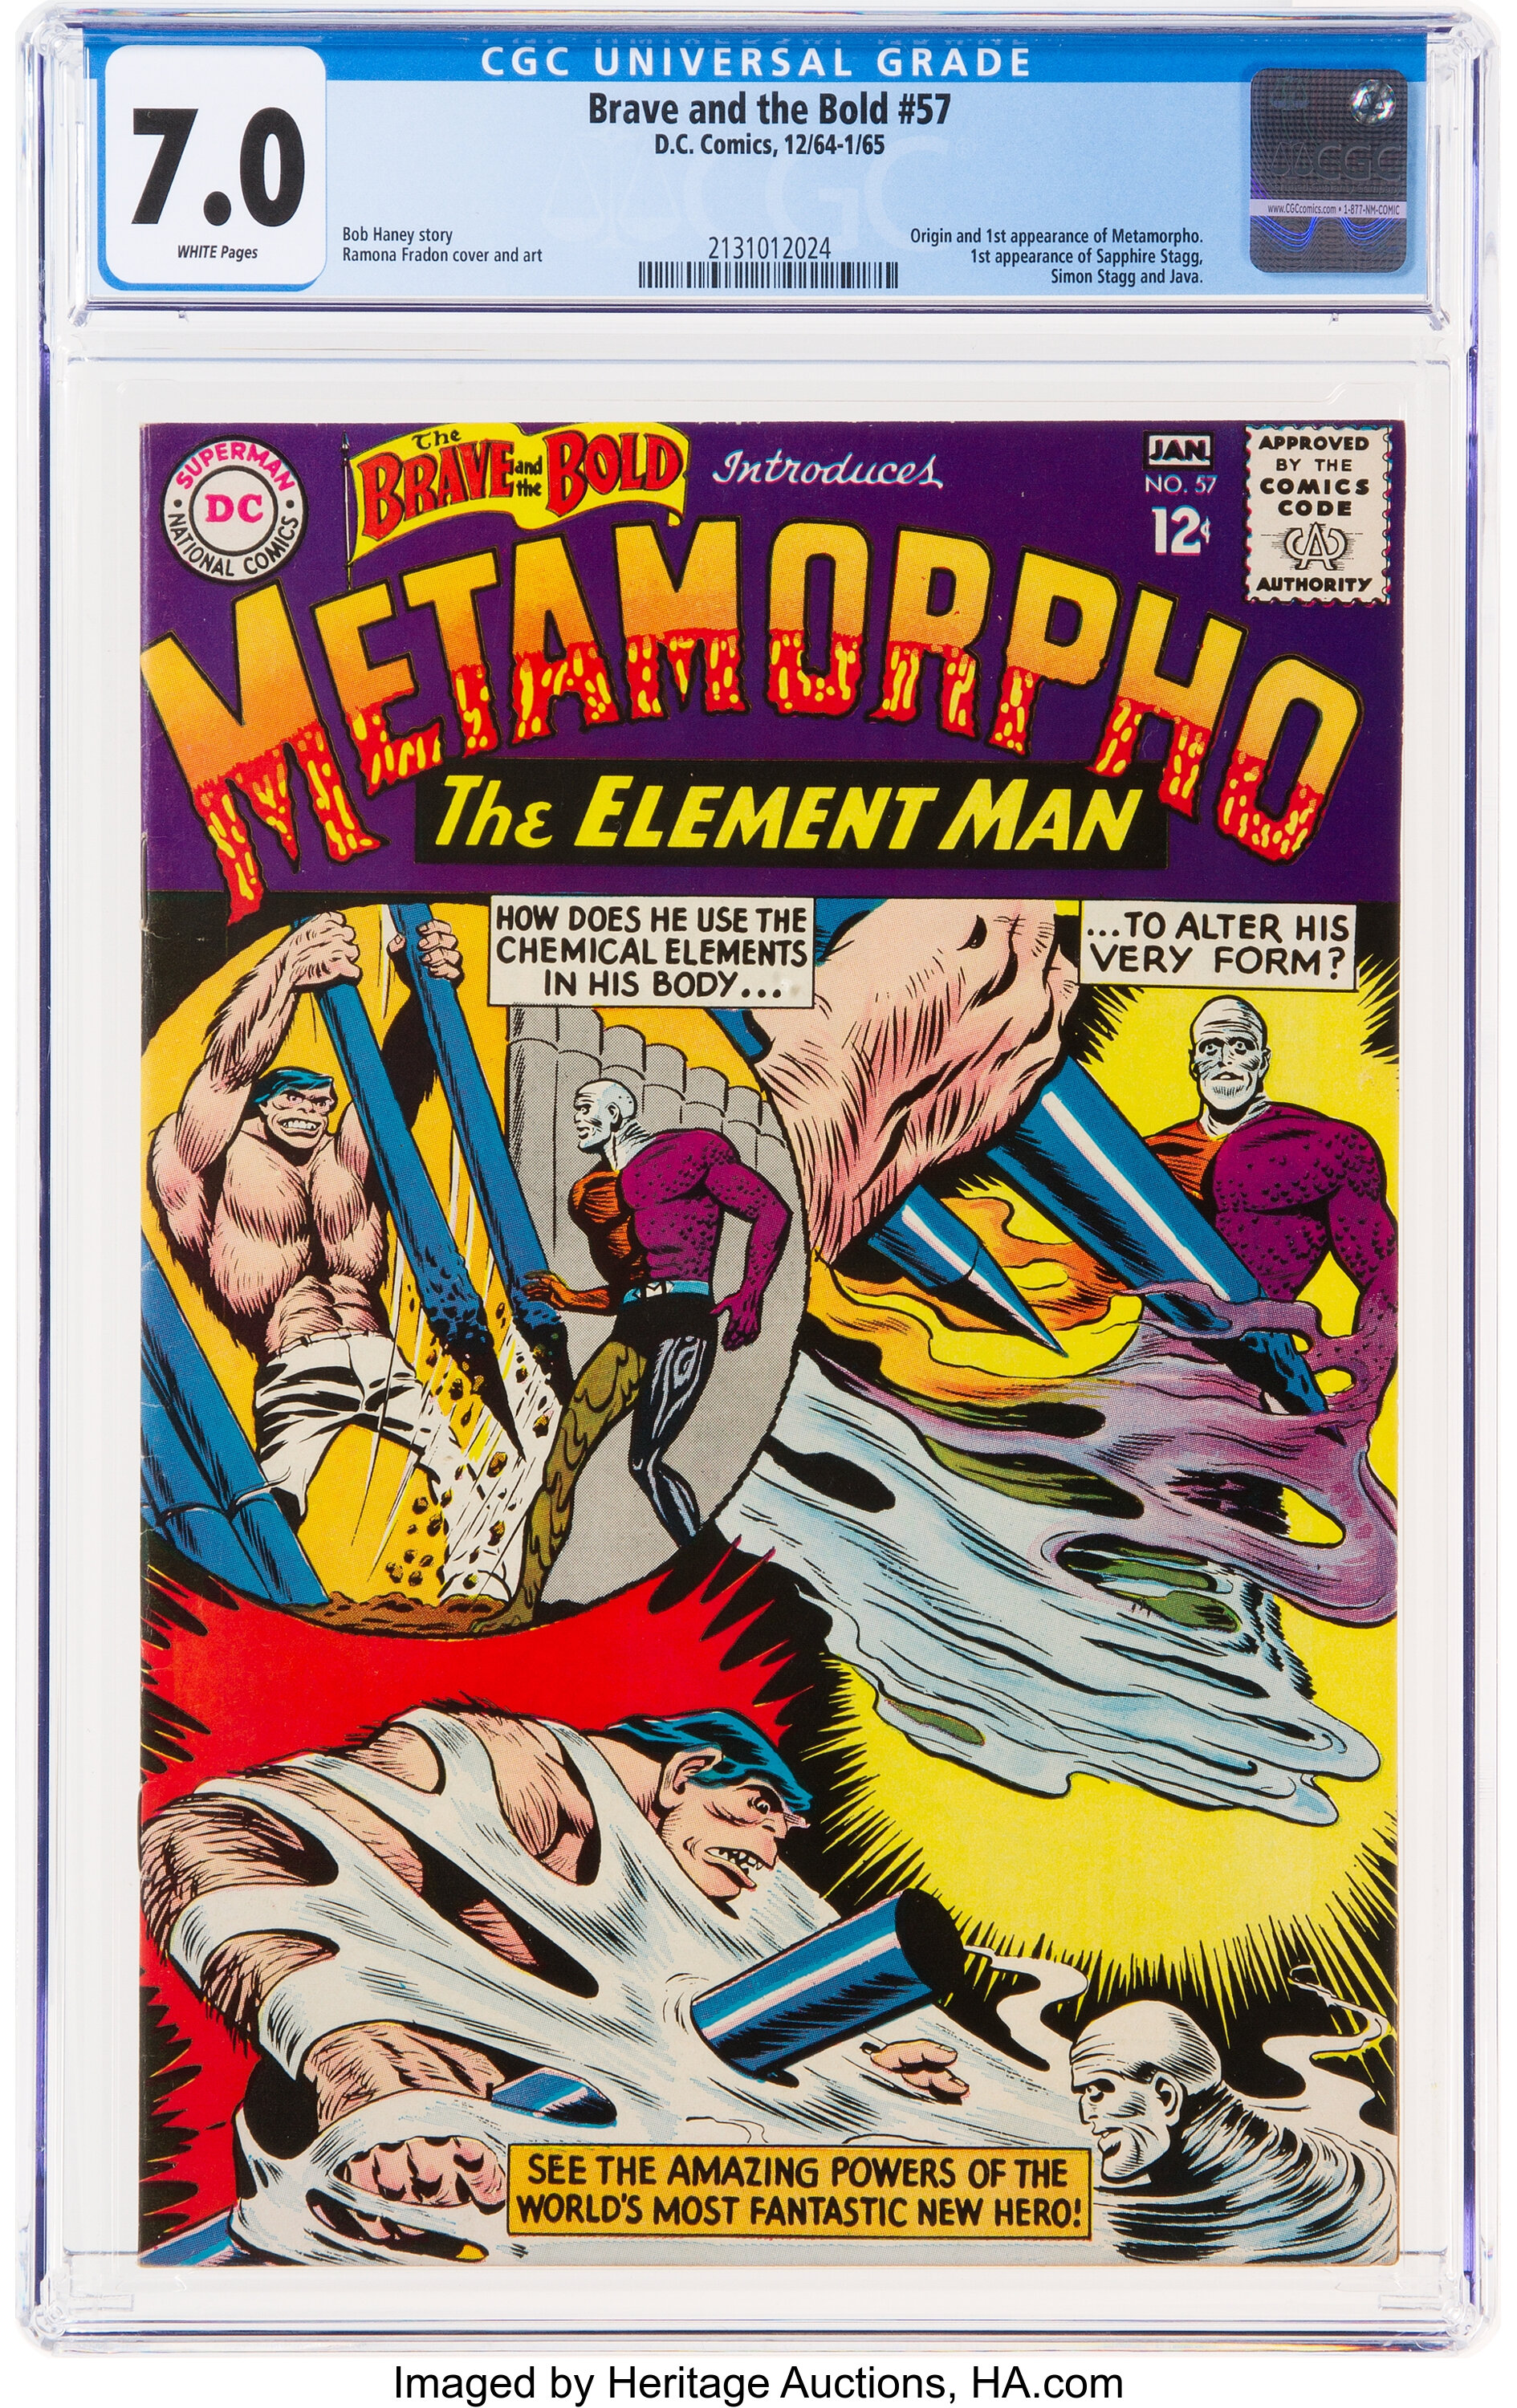 The Brave and the Bold #57 Metamorpho (DC, 1964) CGC FN/VF 7.0, Lot #17119